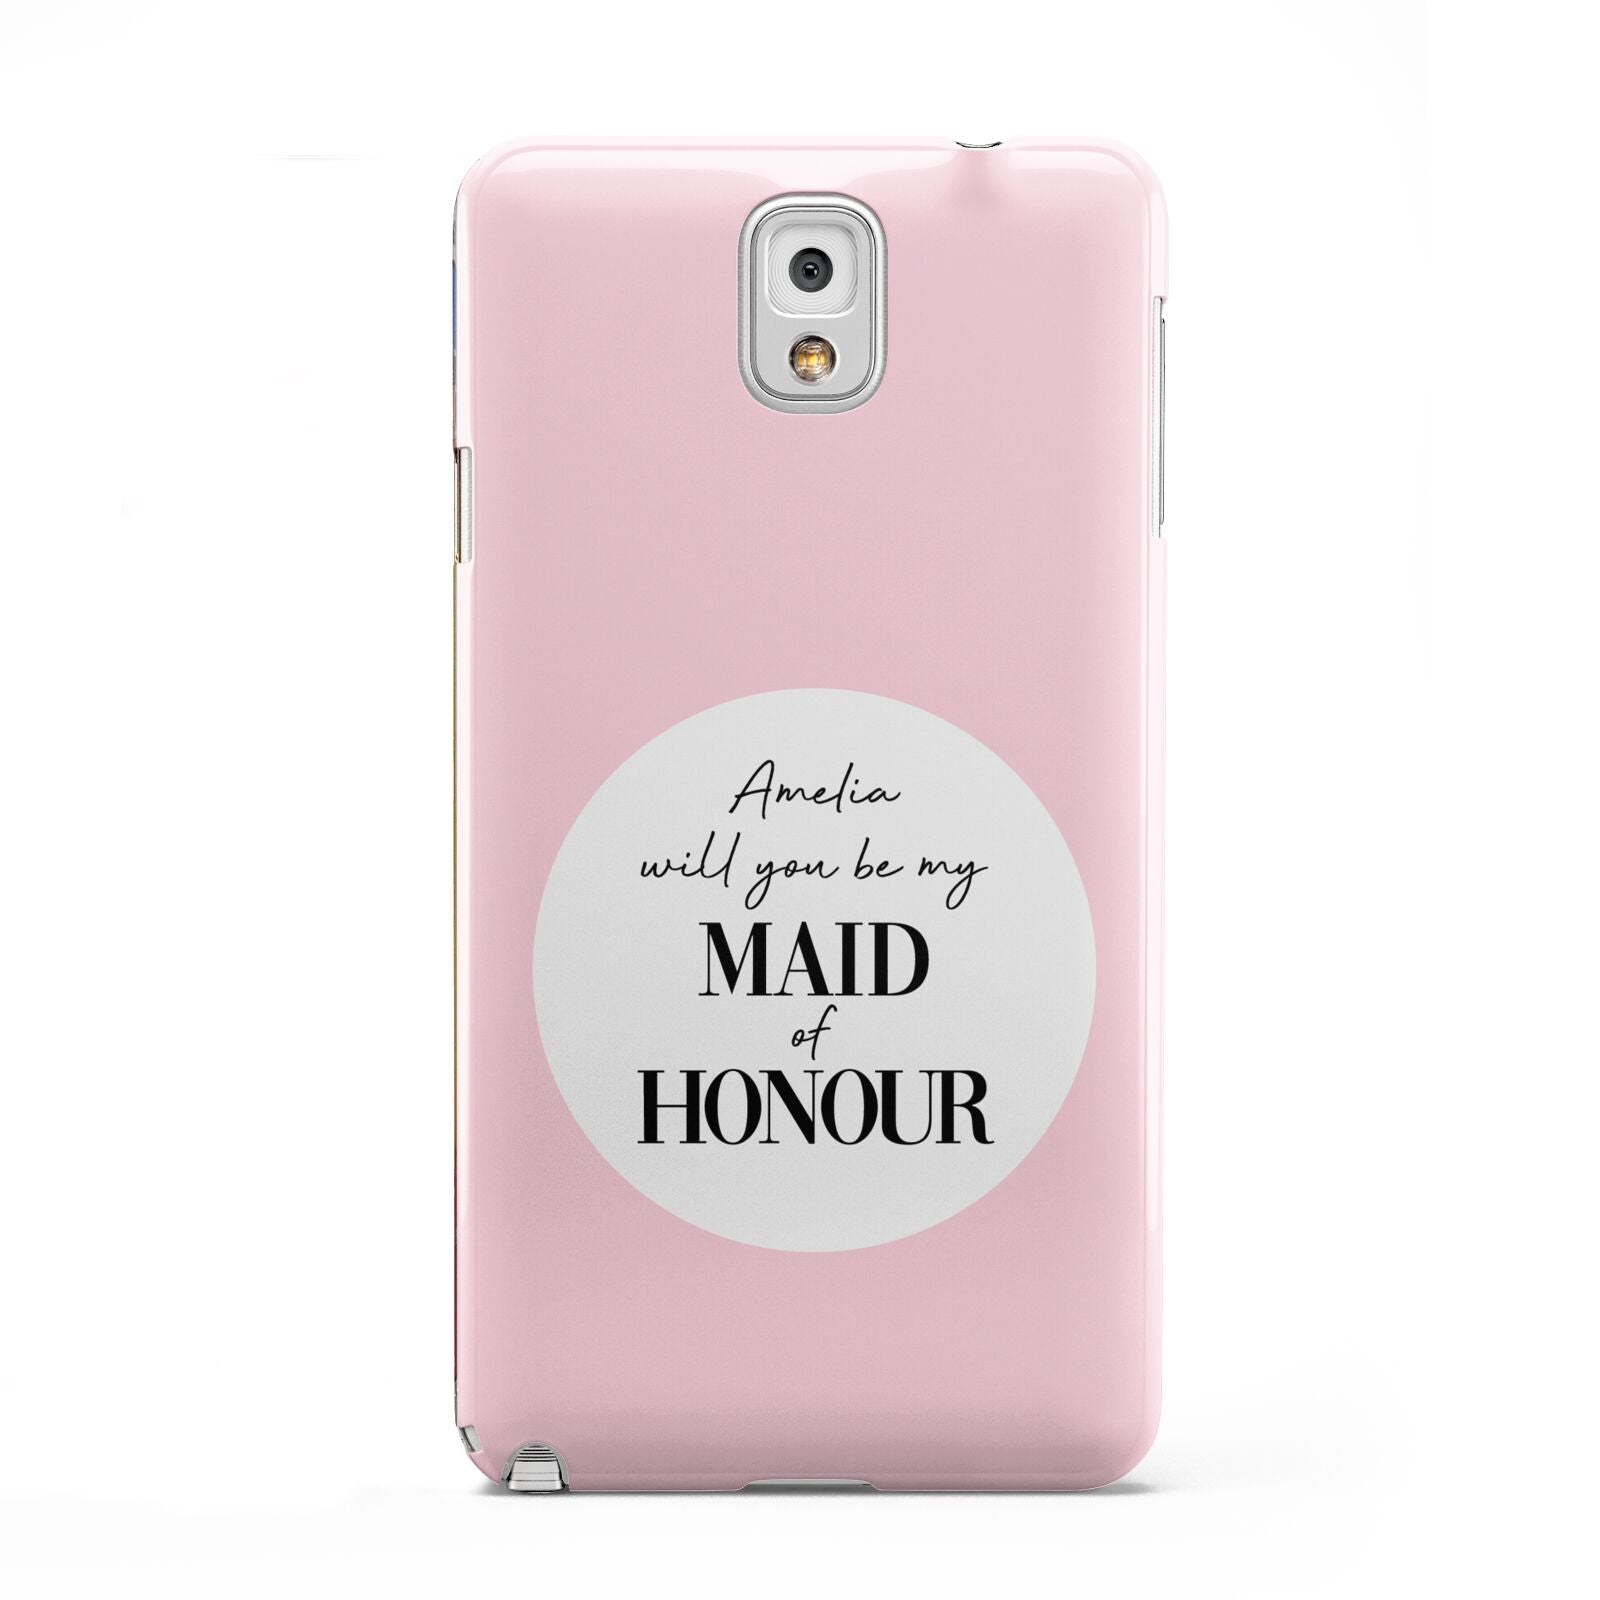 Will You Be My Maid Of Honour Samsung Galaxy Note 3 Case